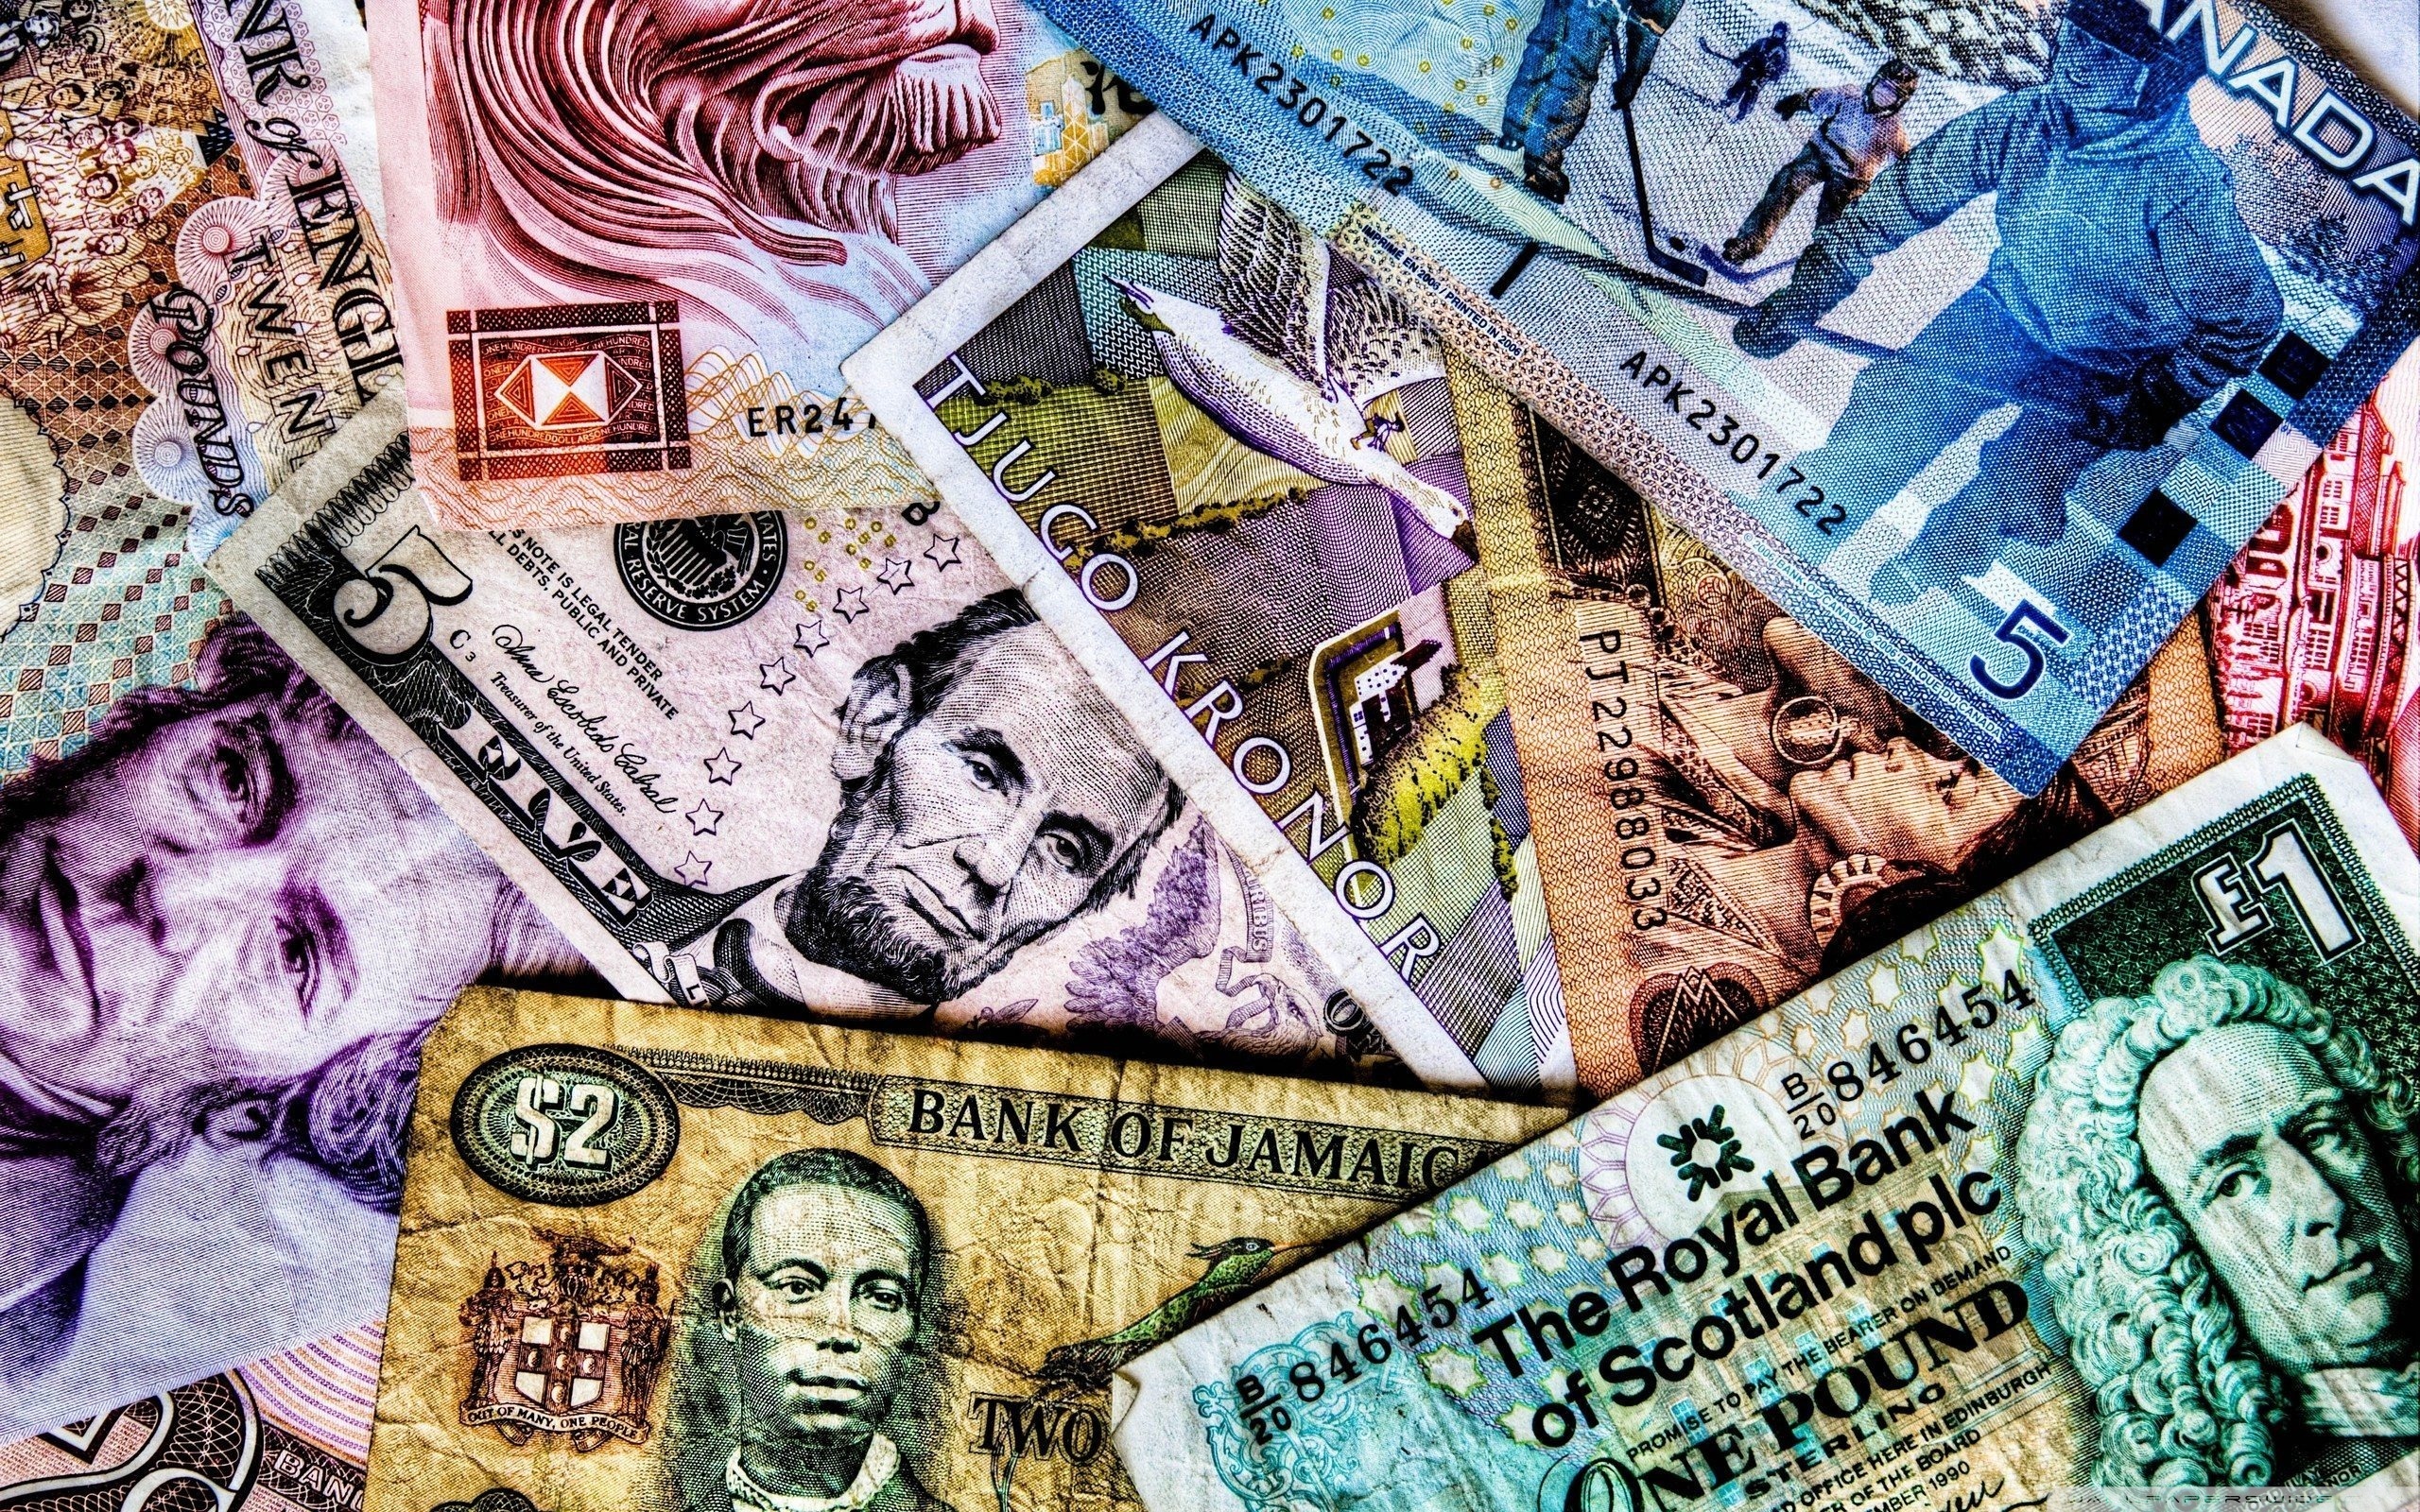 World Currency Image Hd - HD Wallpaper 